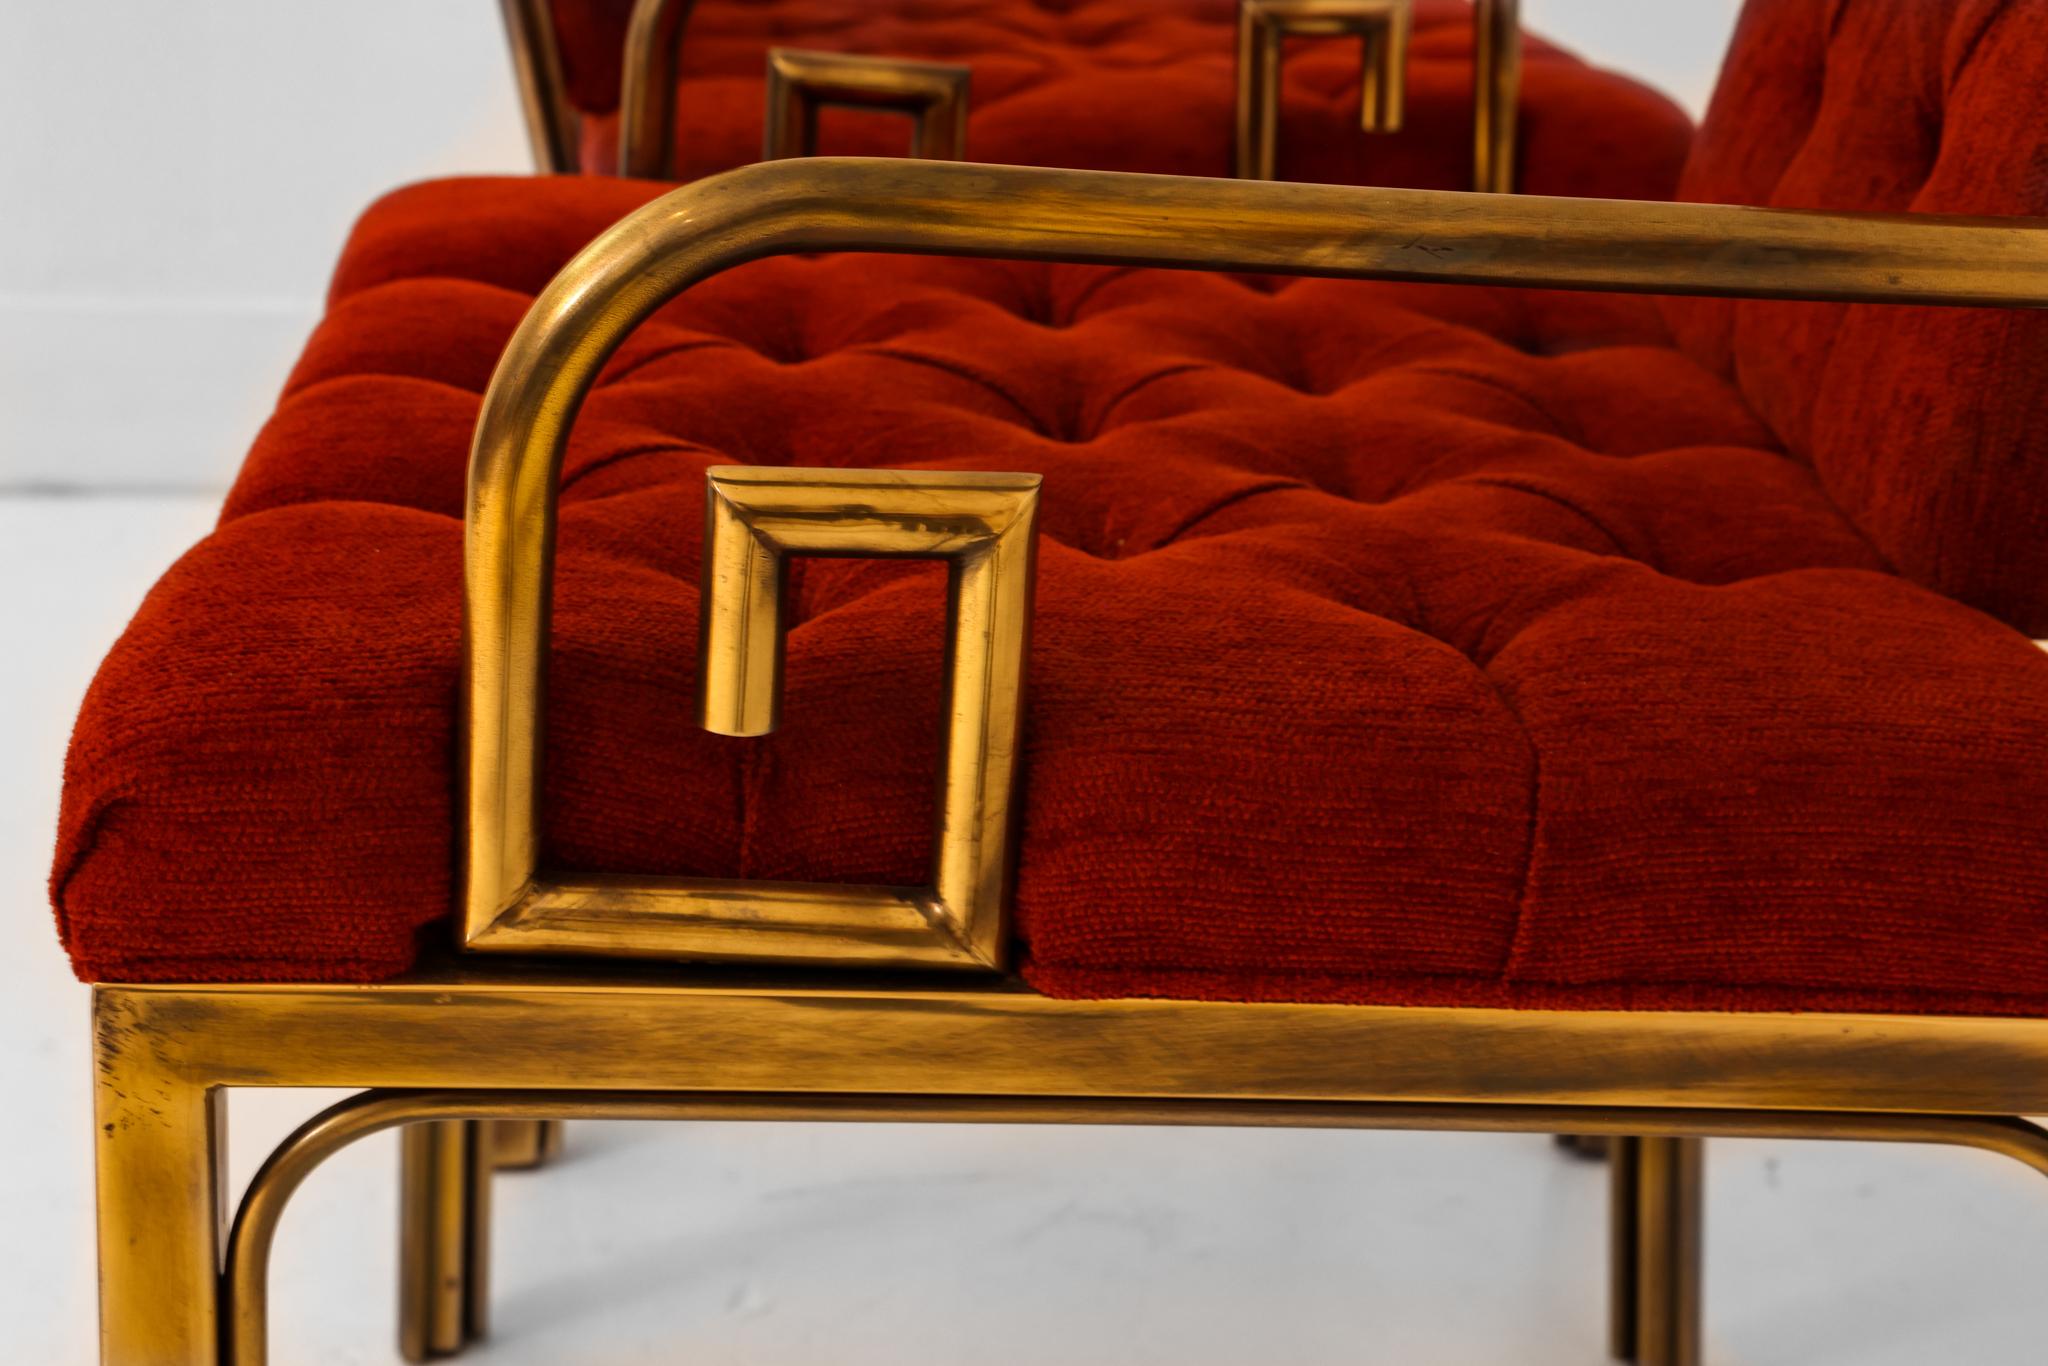 A Pair of Brass Greek Key Chairs Designed by Bernhard Rohne for Master Craft For Sale 3